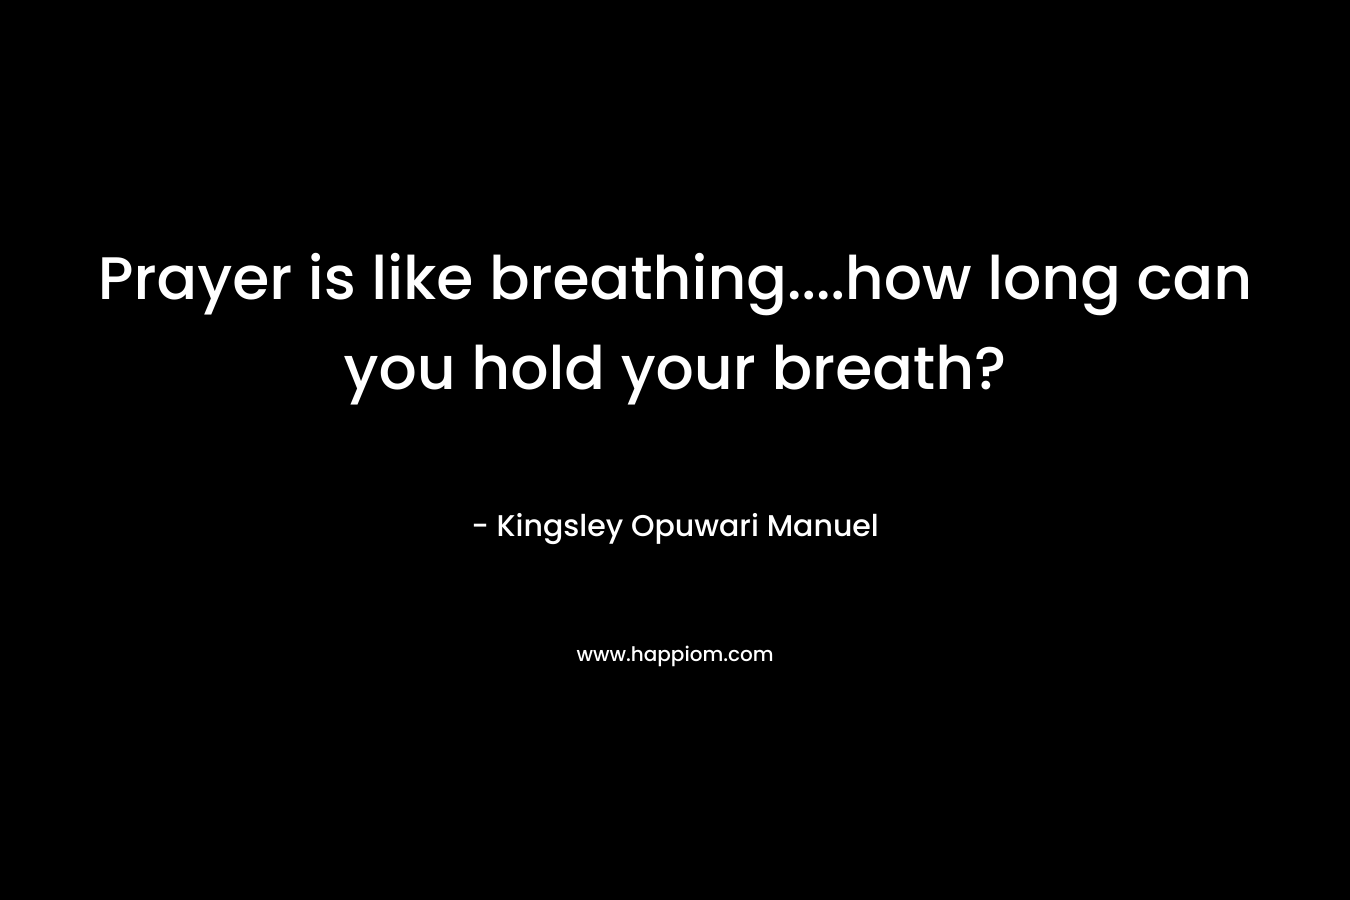 Prayer is like breathing….how long can you hold your breath? – Kingsley Opuwari Manuel